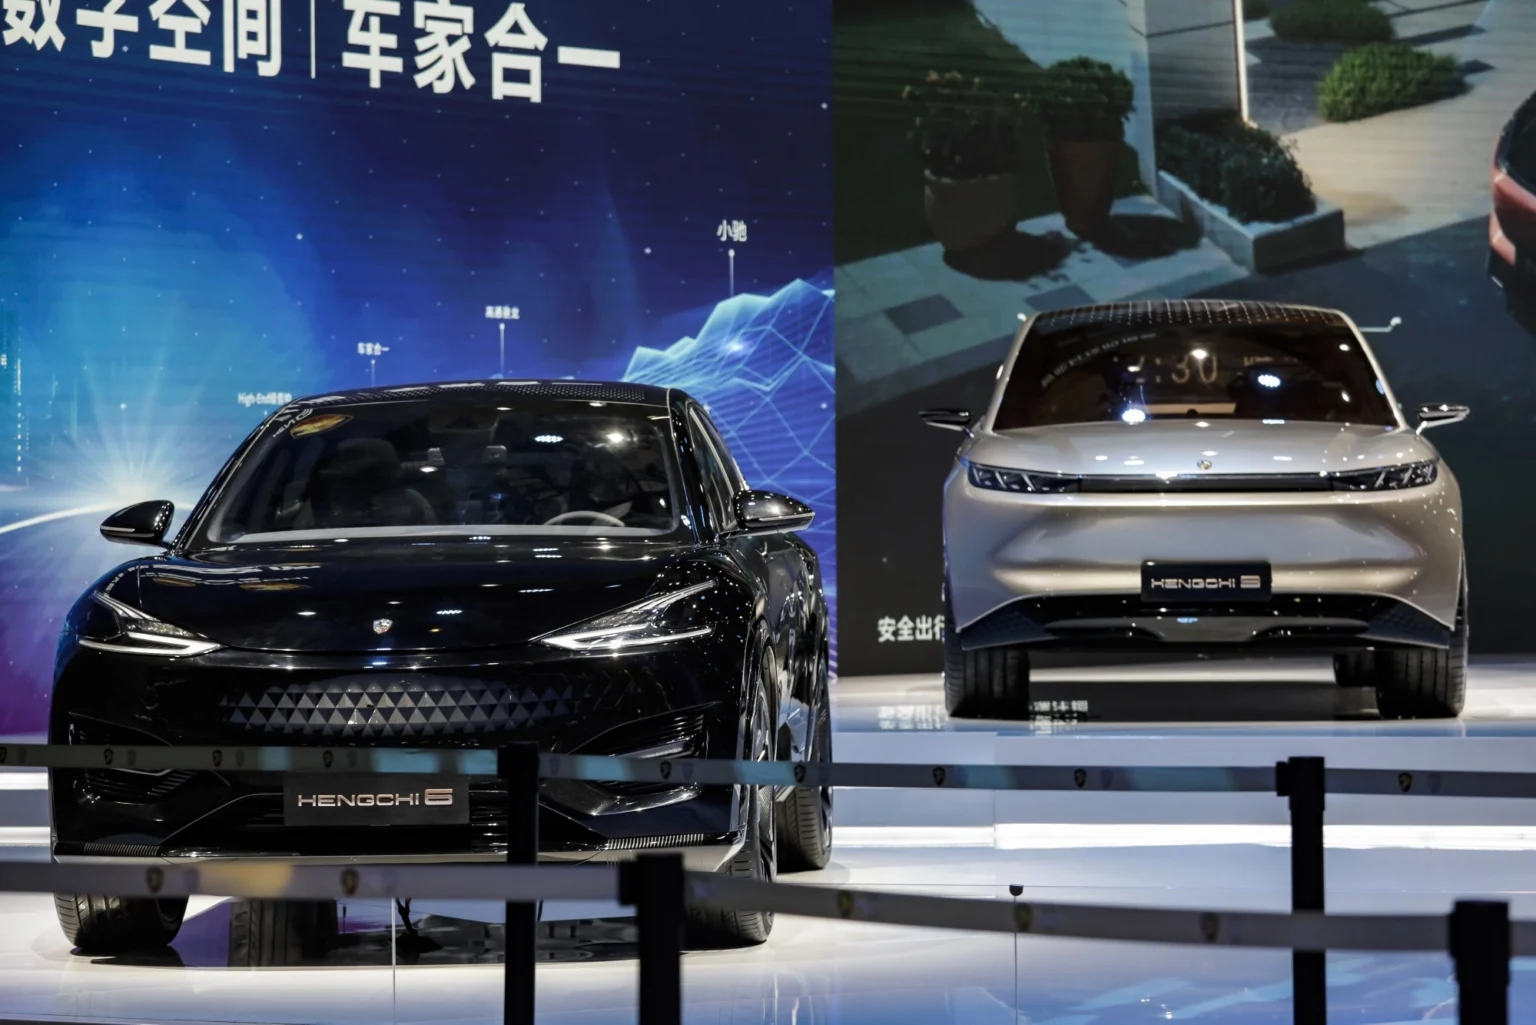 liu-yongzhuo-authorities-detain-head-of-indebted-china-evergrande-new-energy-vehicle